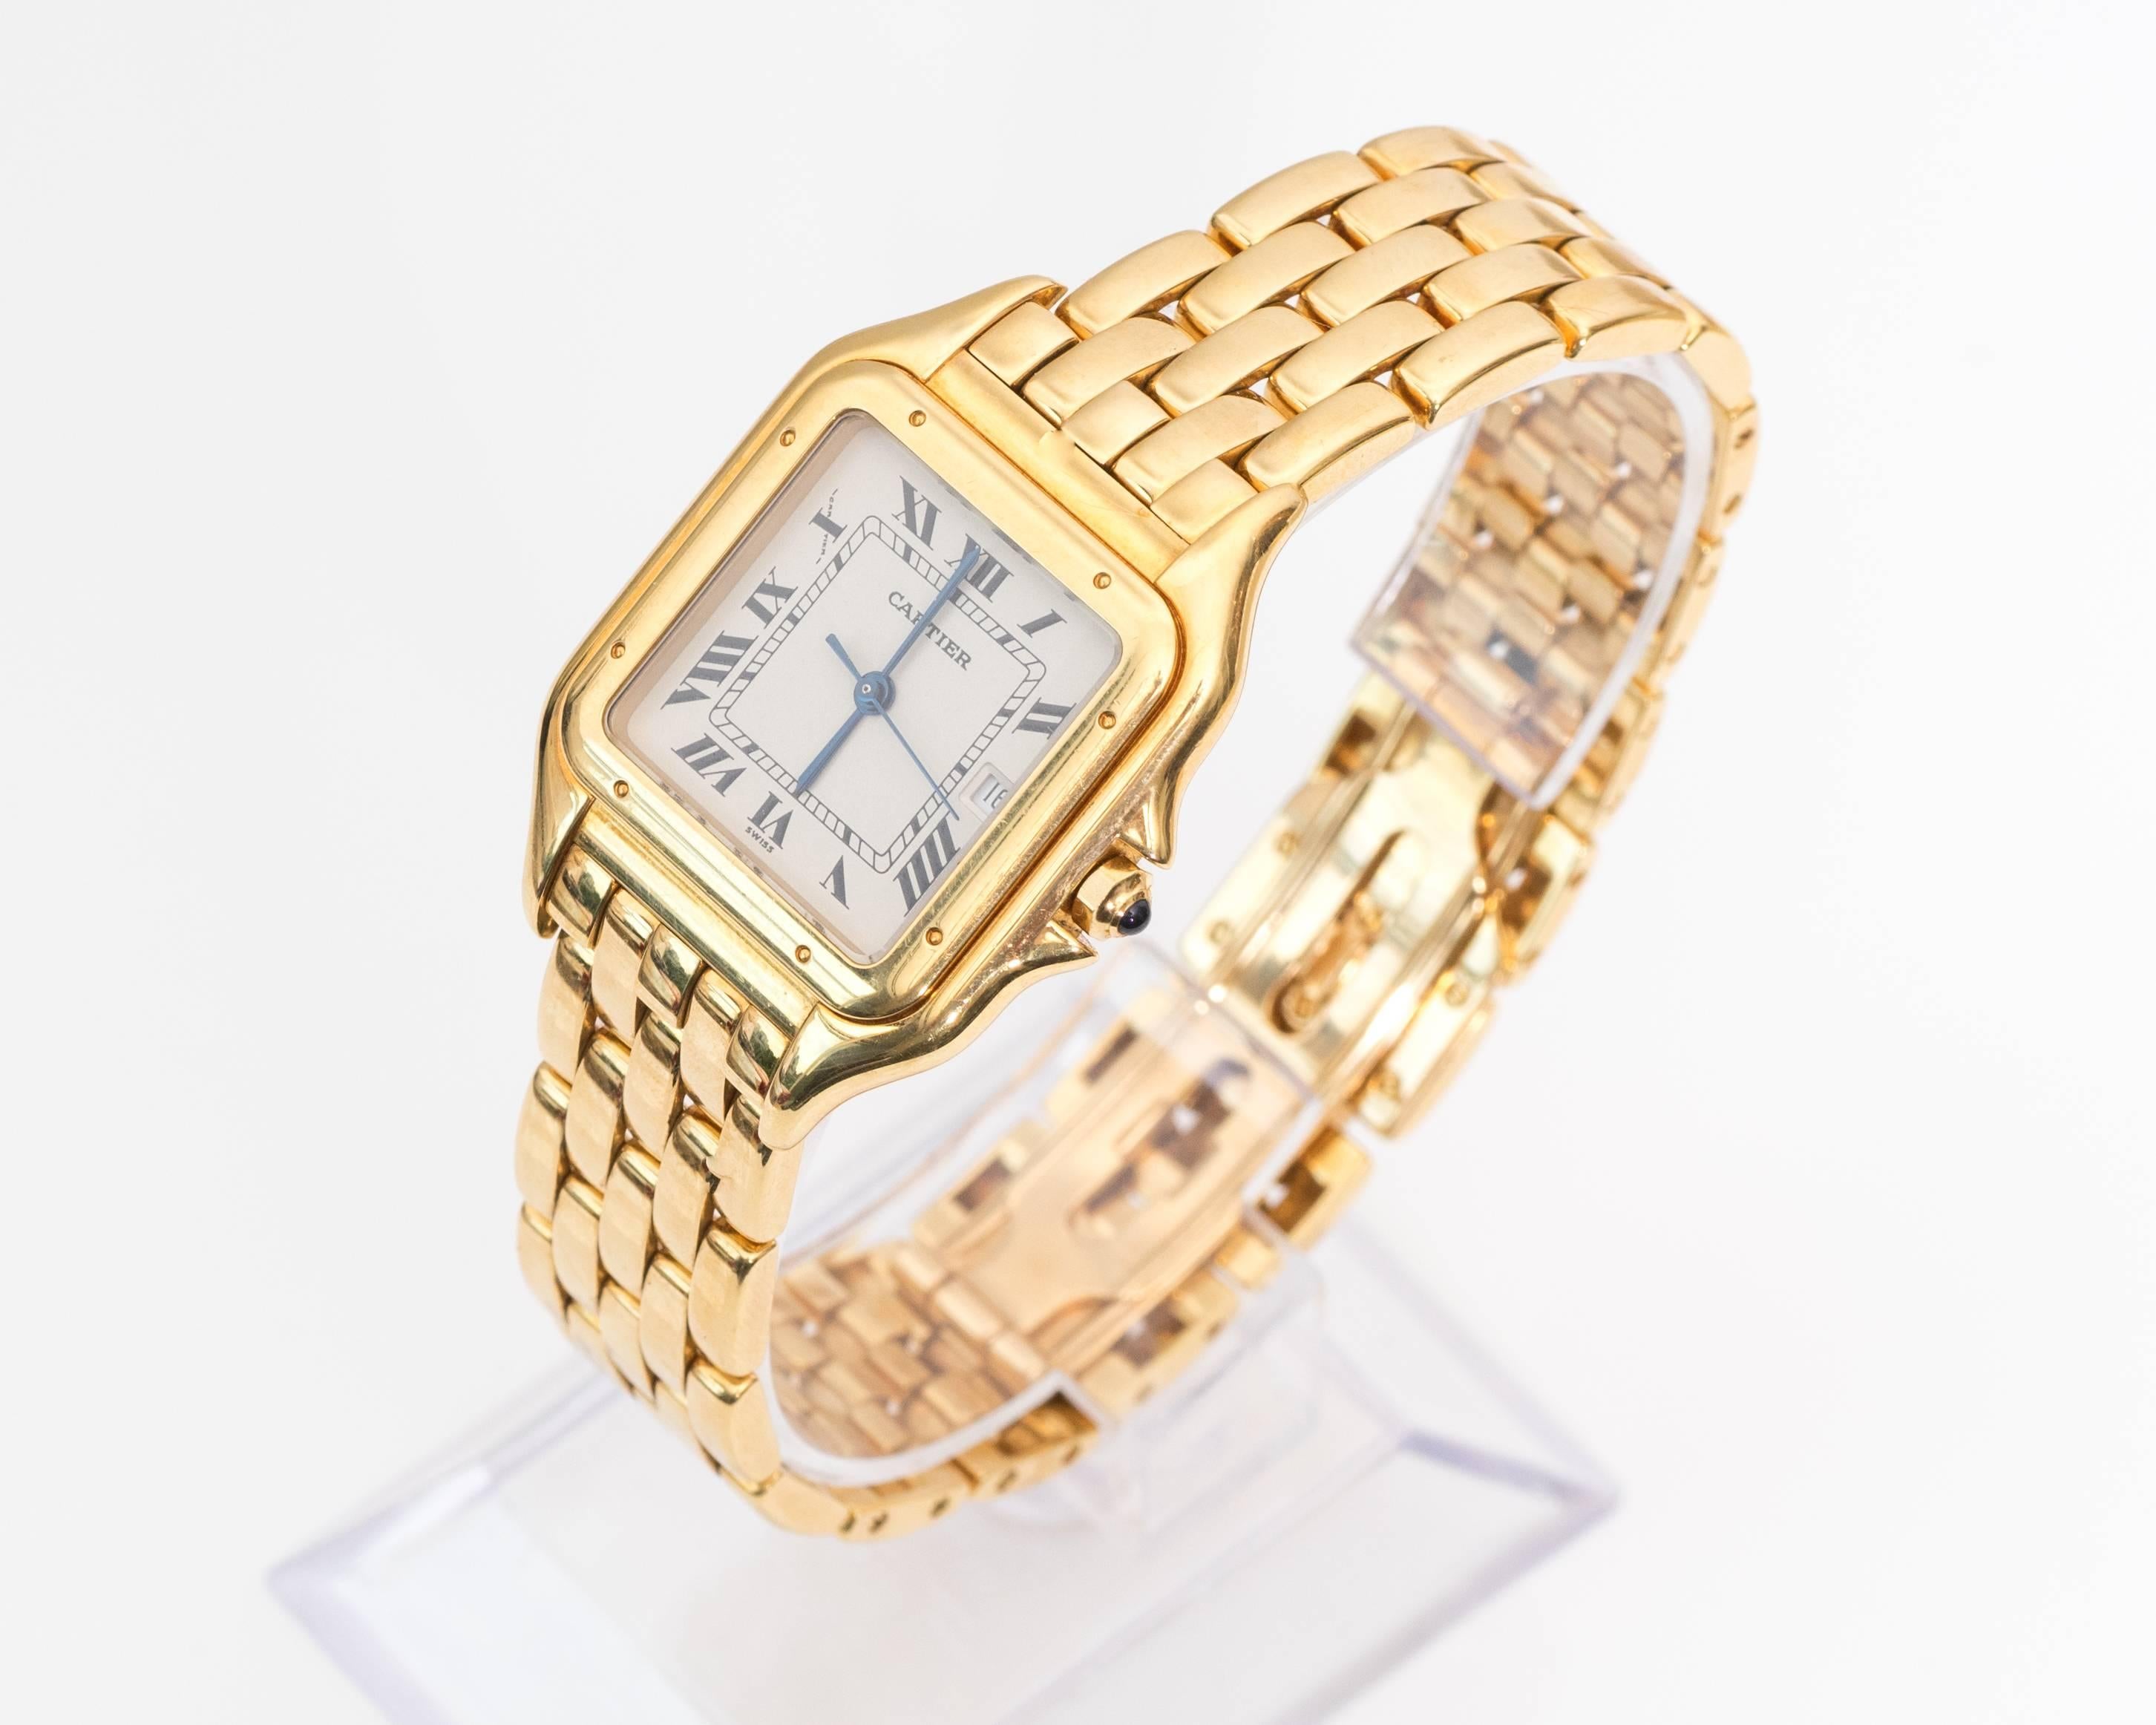 Cartier Wristwatch, 1980s
Medium Size
Panther Model
18 Karat Yellow Gold
Features 27mm x 38mm case with Domed Stepped Bezel secured by Screws
White Dial with Classic Cartier Roman Figures and Blued Steel Hands
Powered by Quartz Movement with Sweep